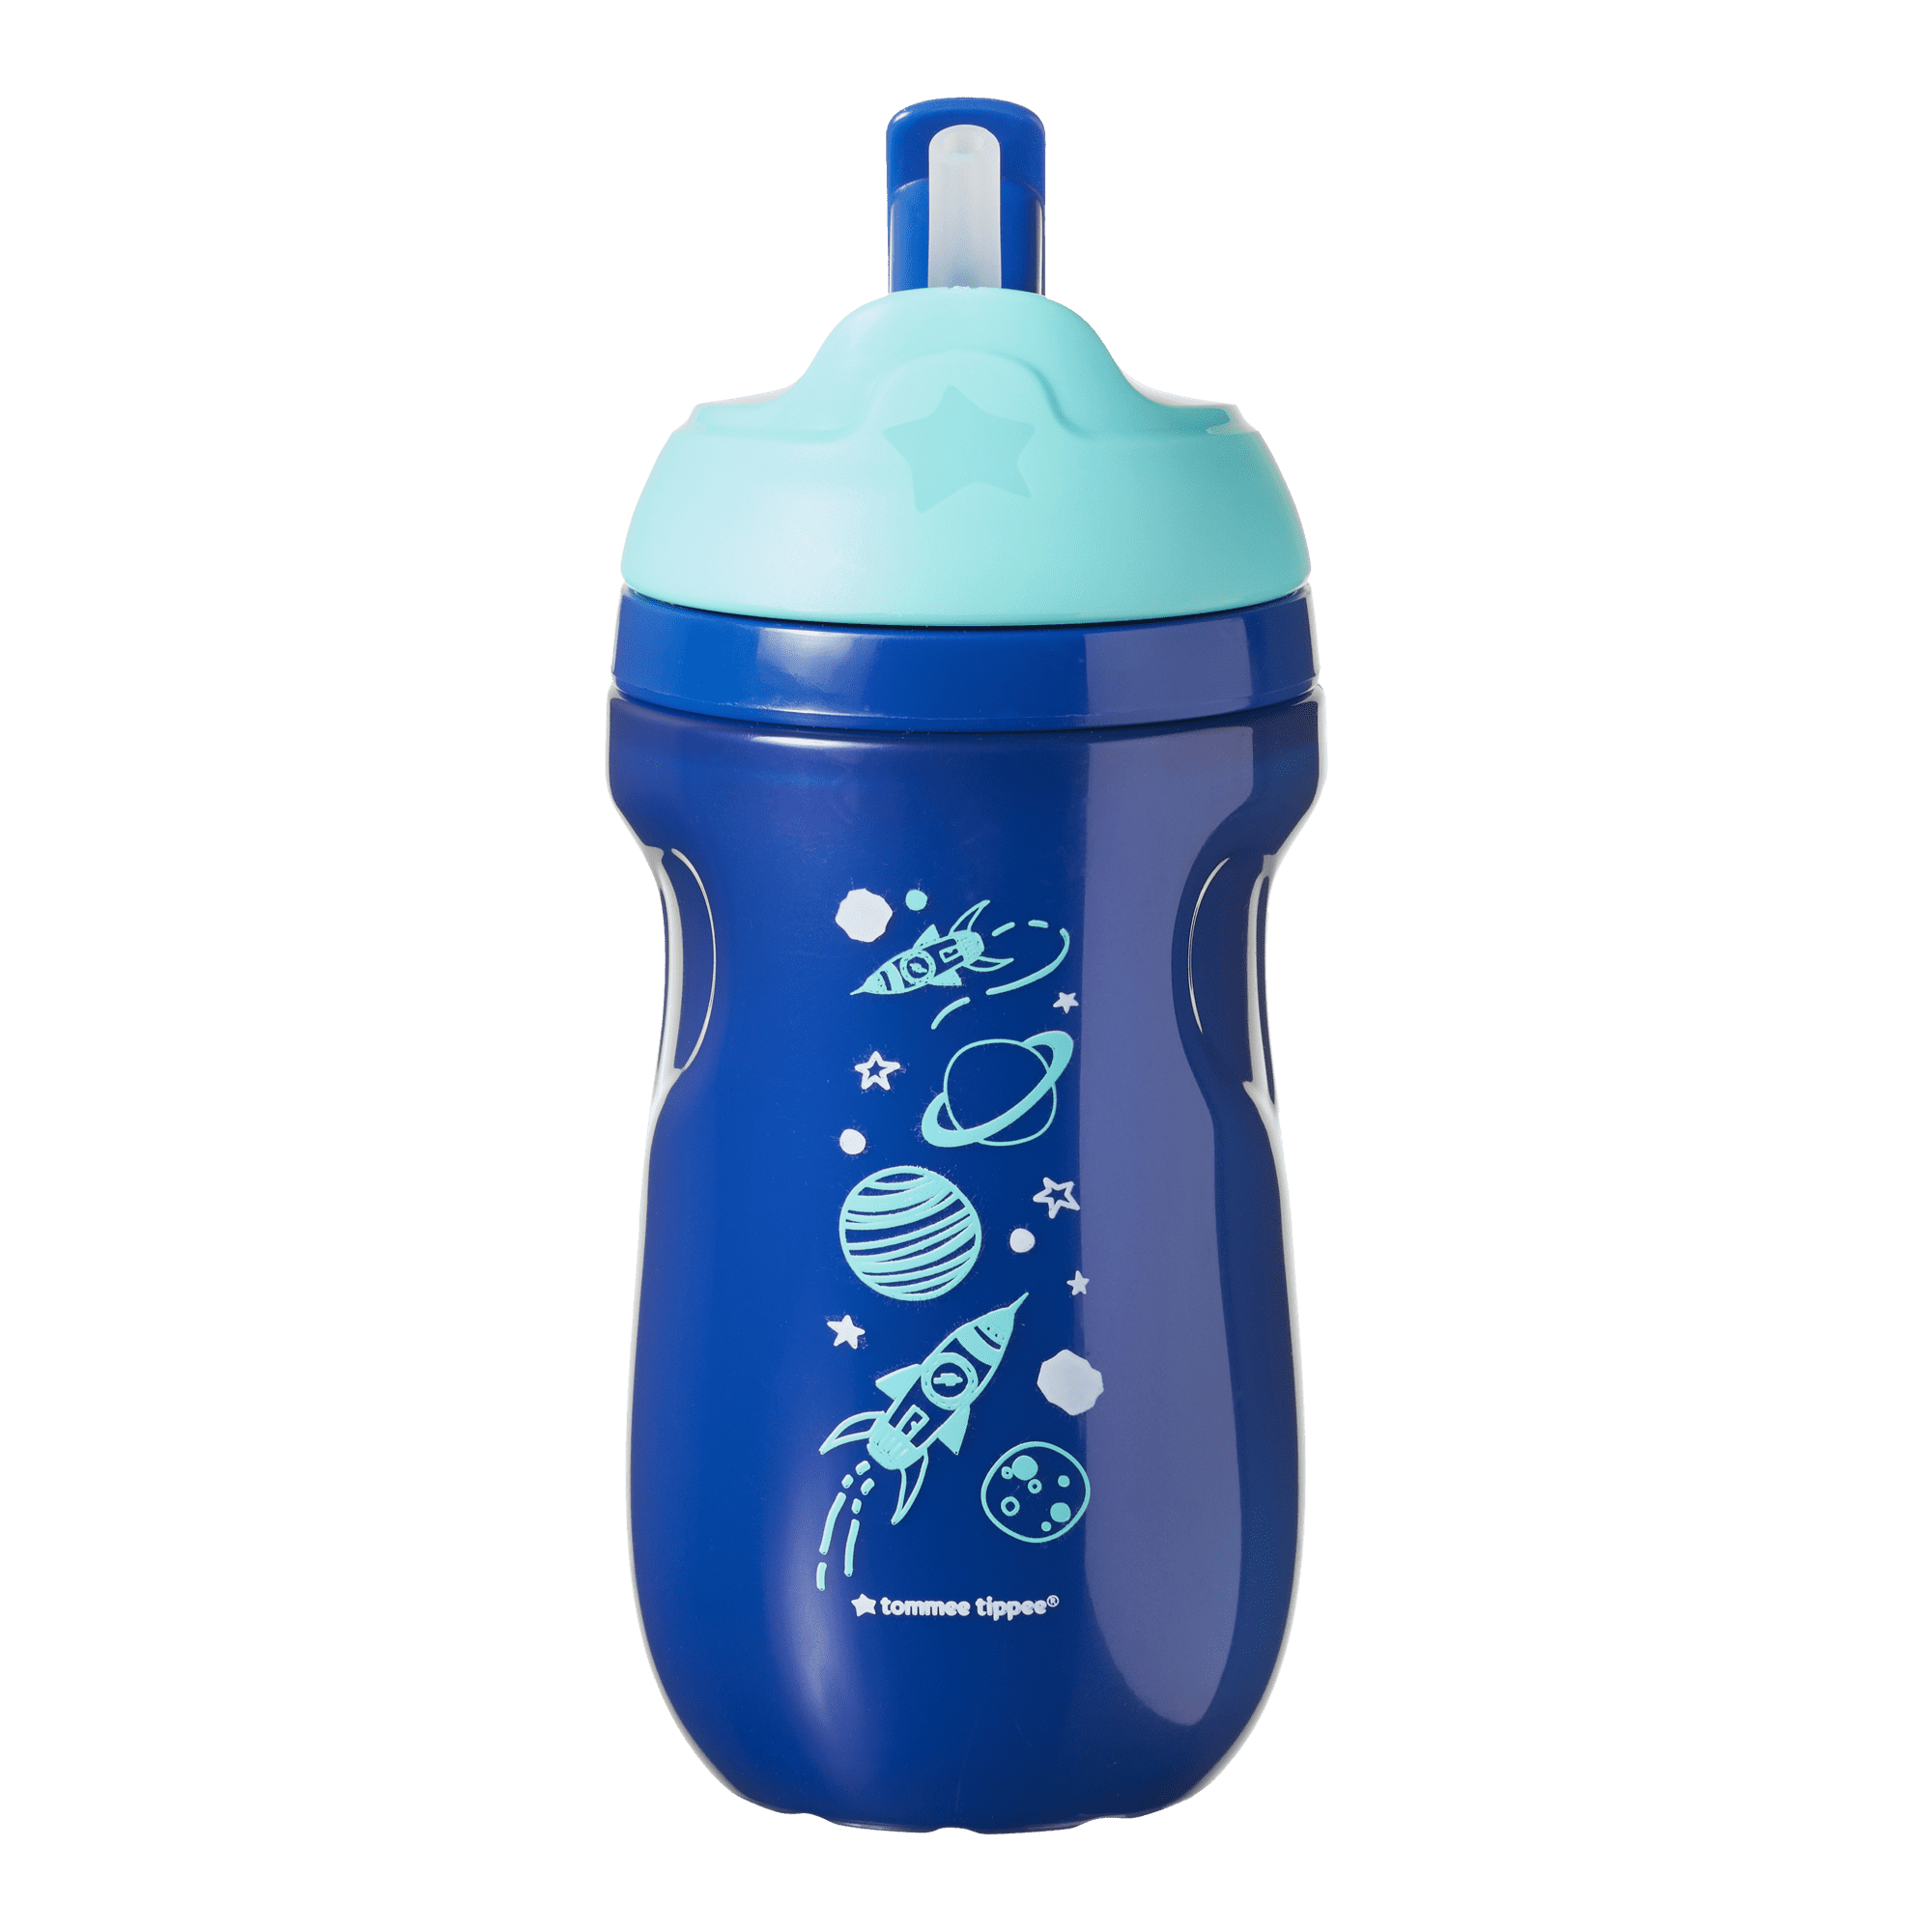 Straw Insulated Sippy Cup for Toddlers, Bacshield Antimicrobial